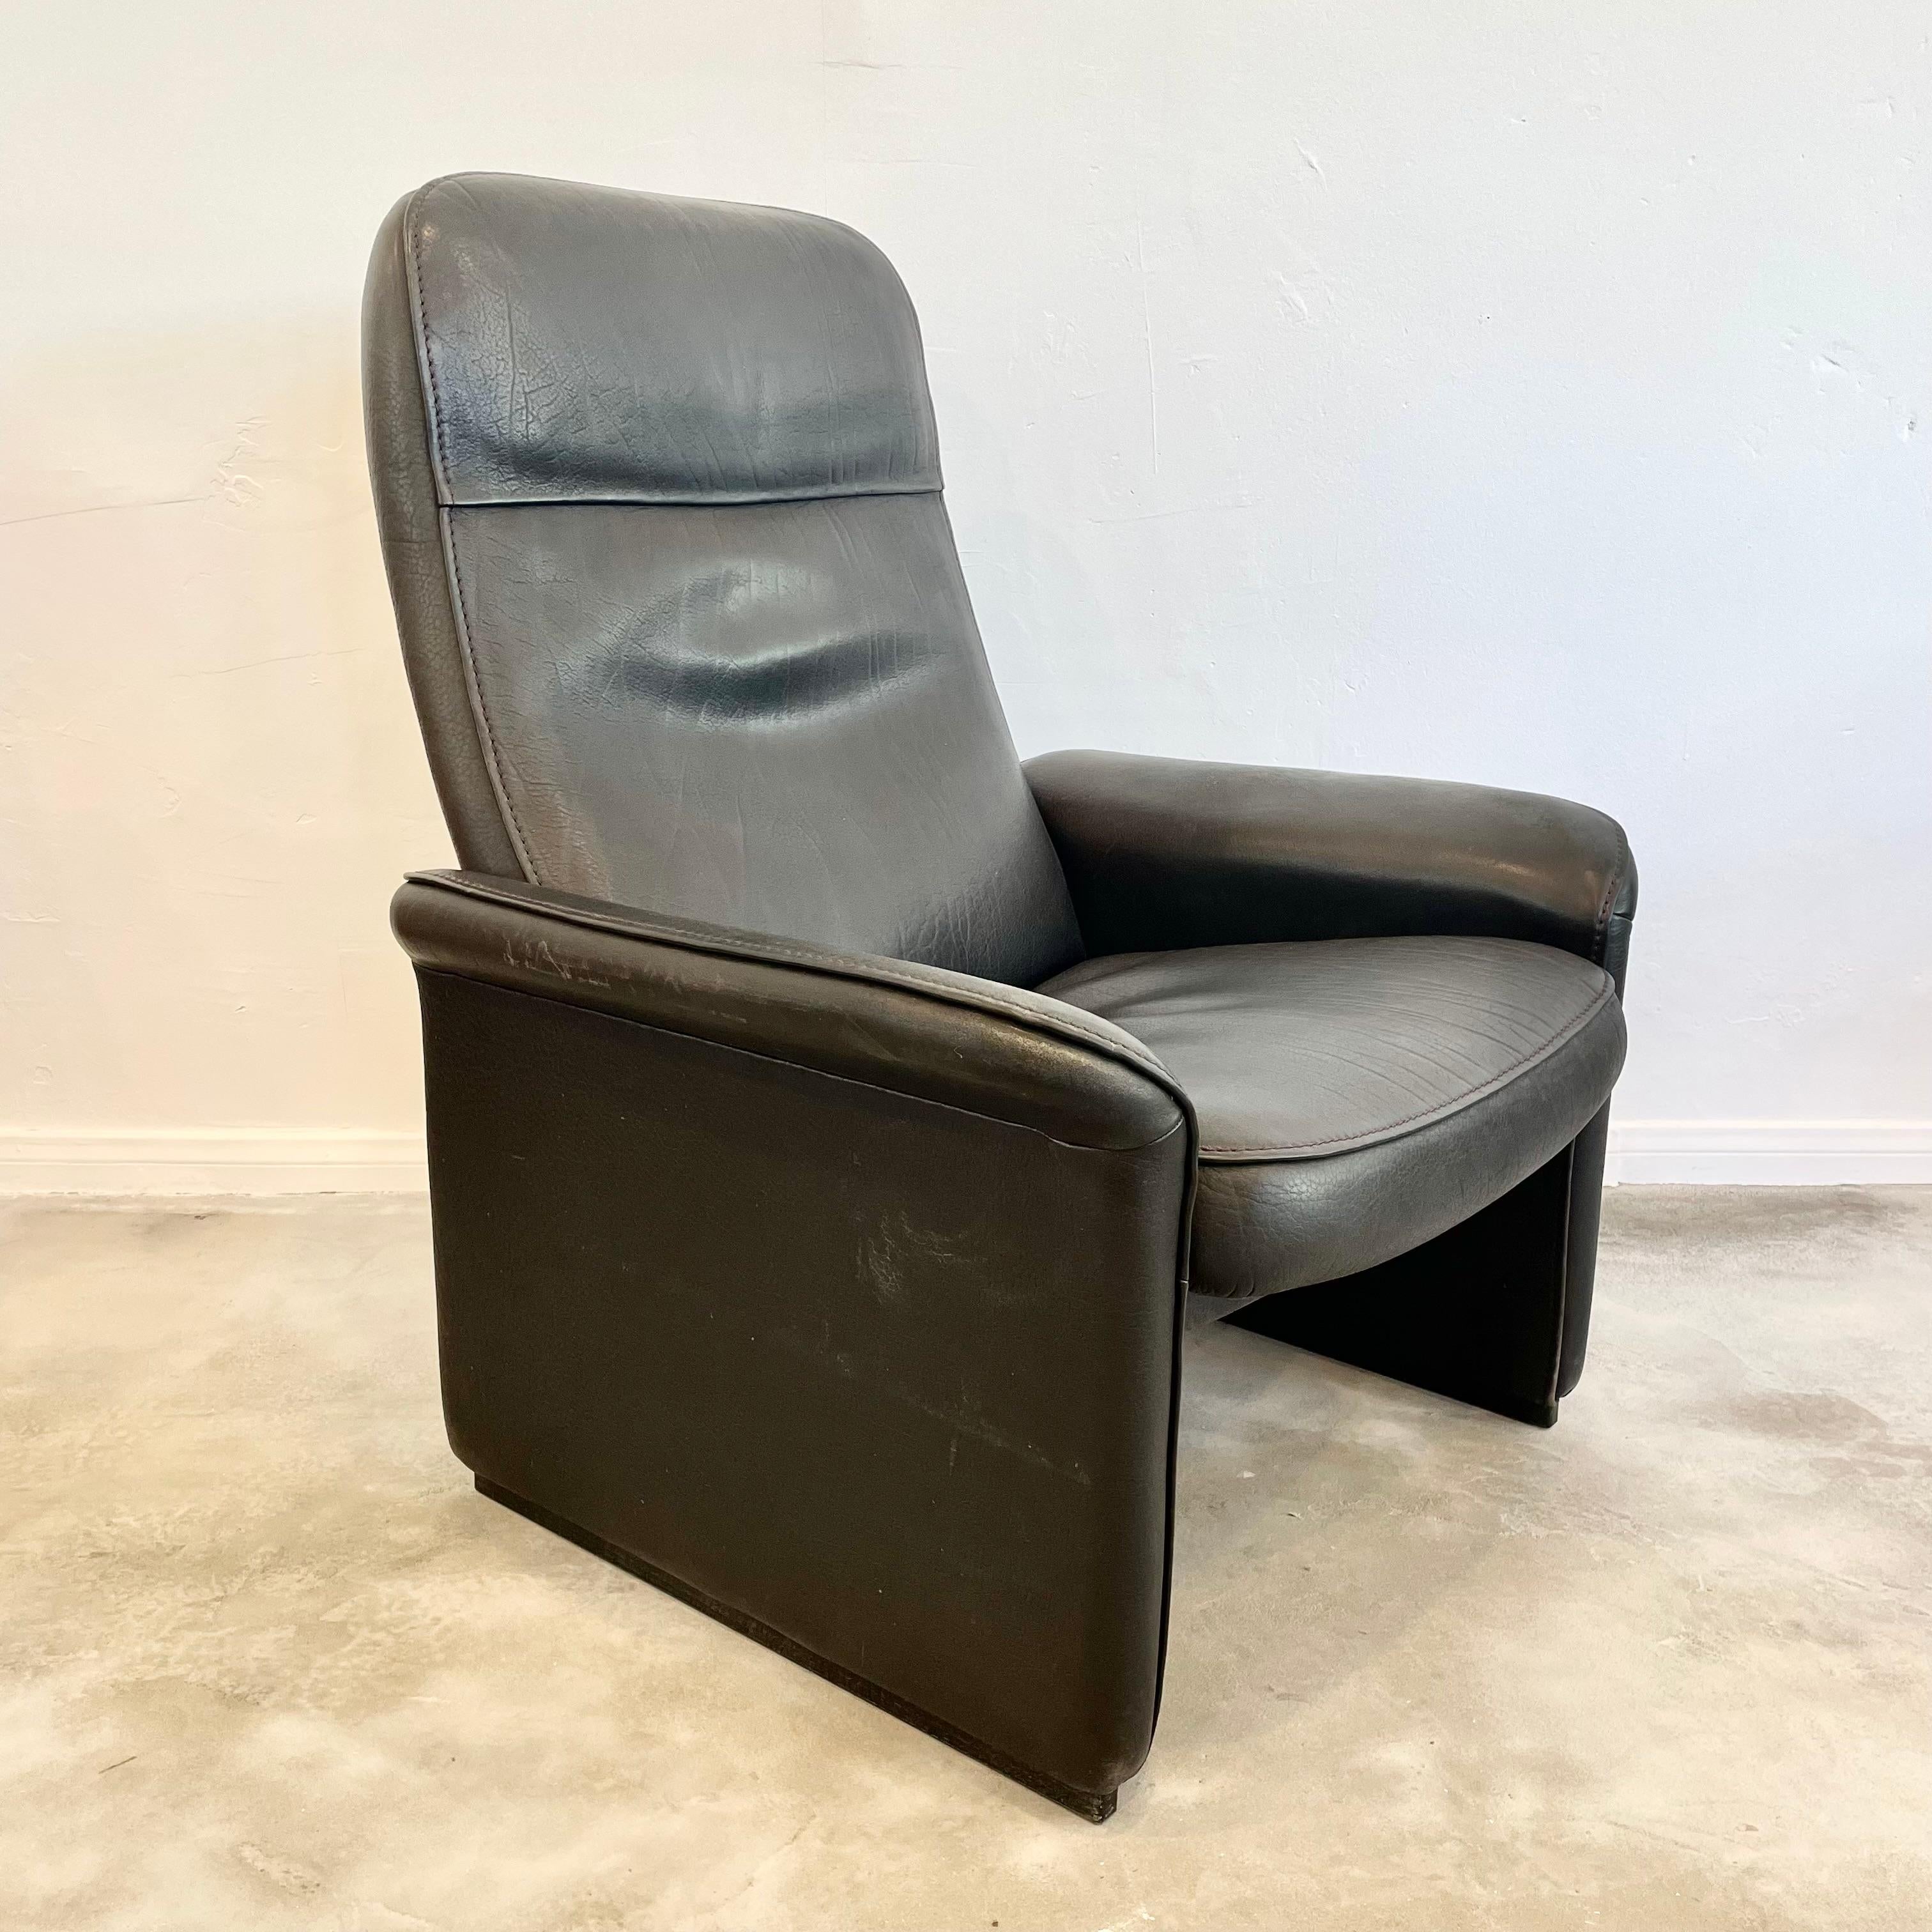 Pair of De Sede DS-50 Black Leather Recliner Chairs, 1970s Switzerland For Sale 5